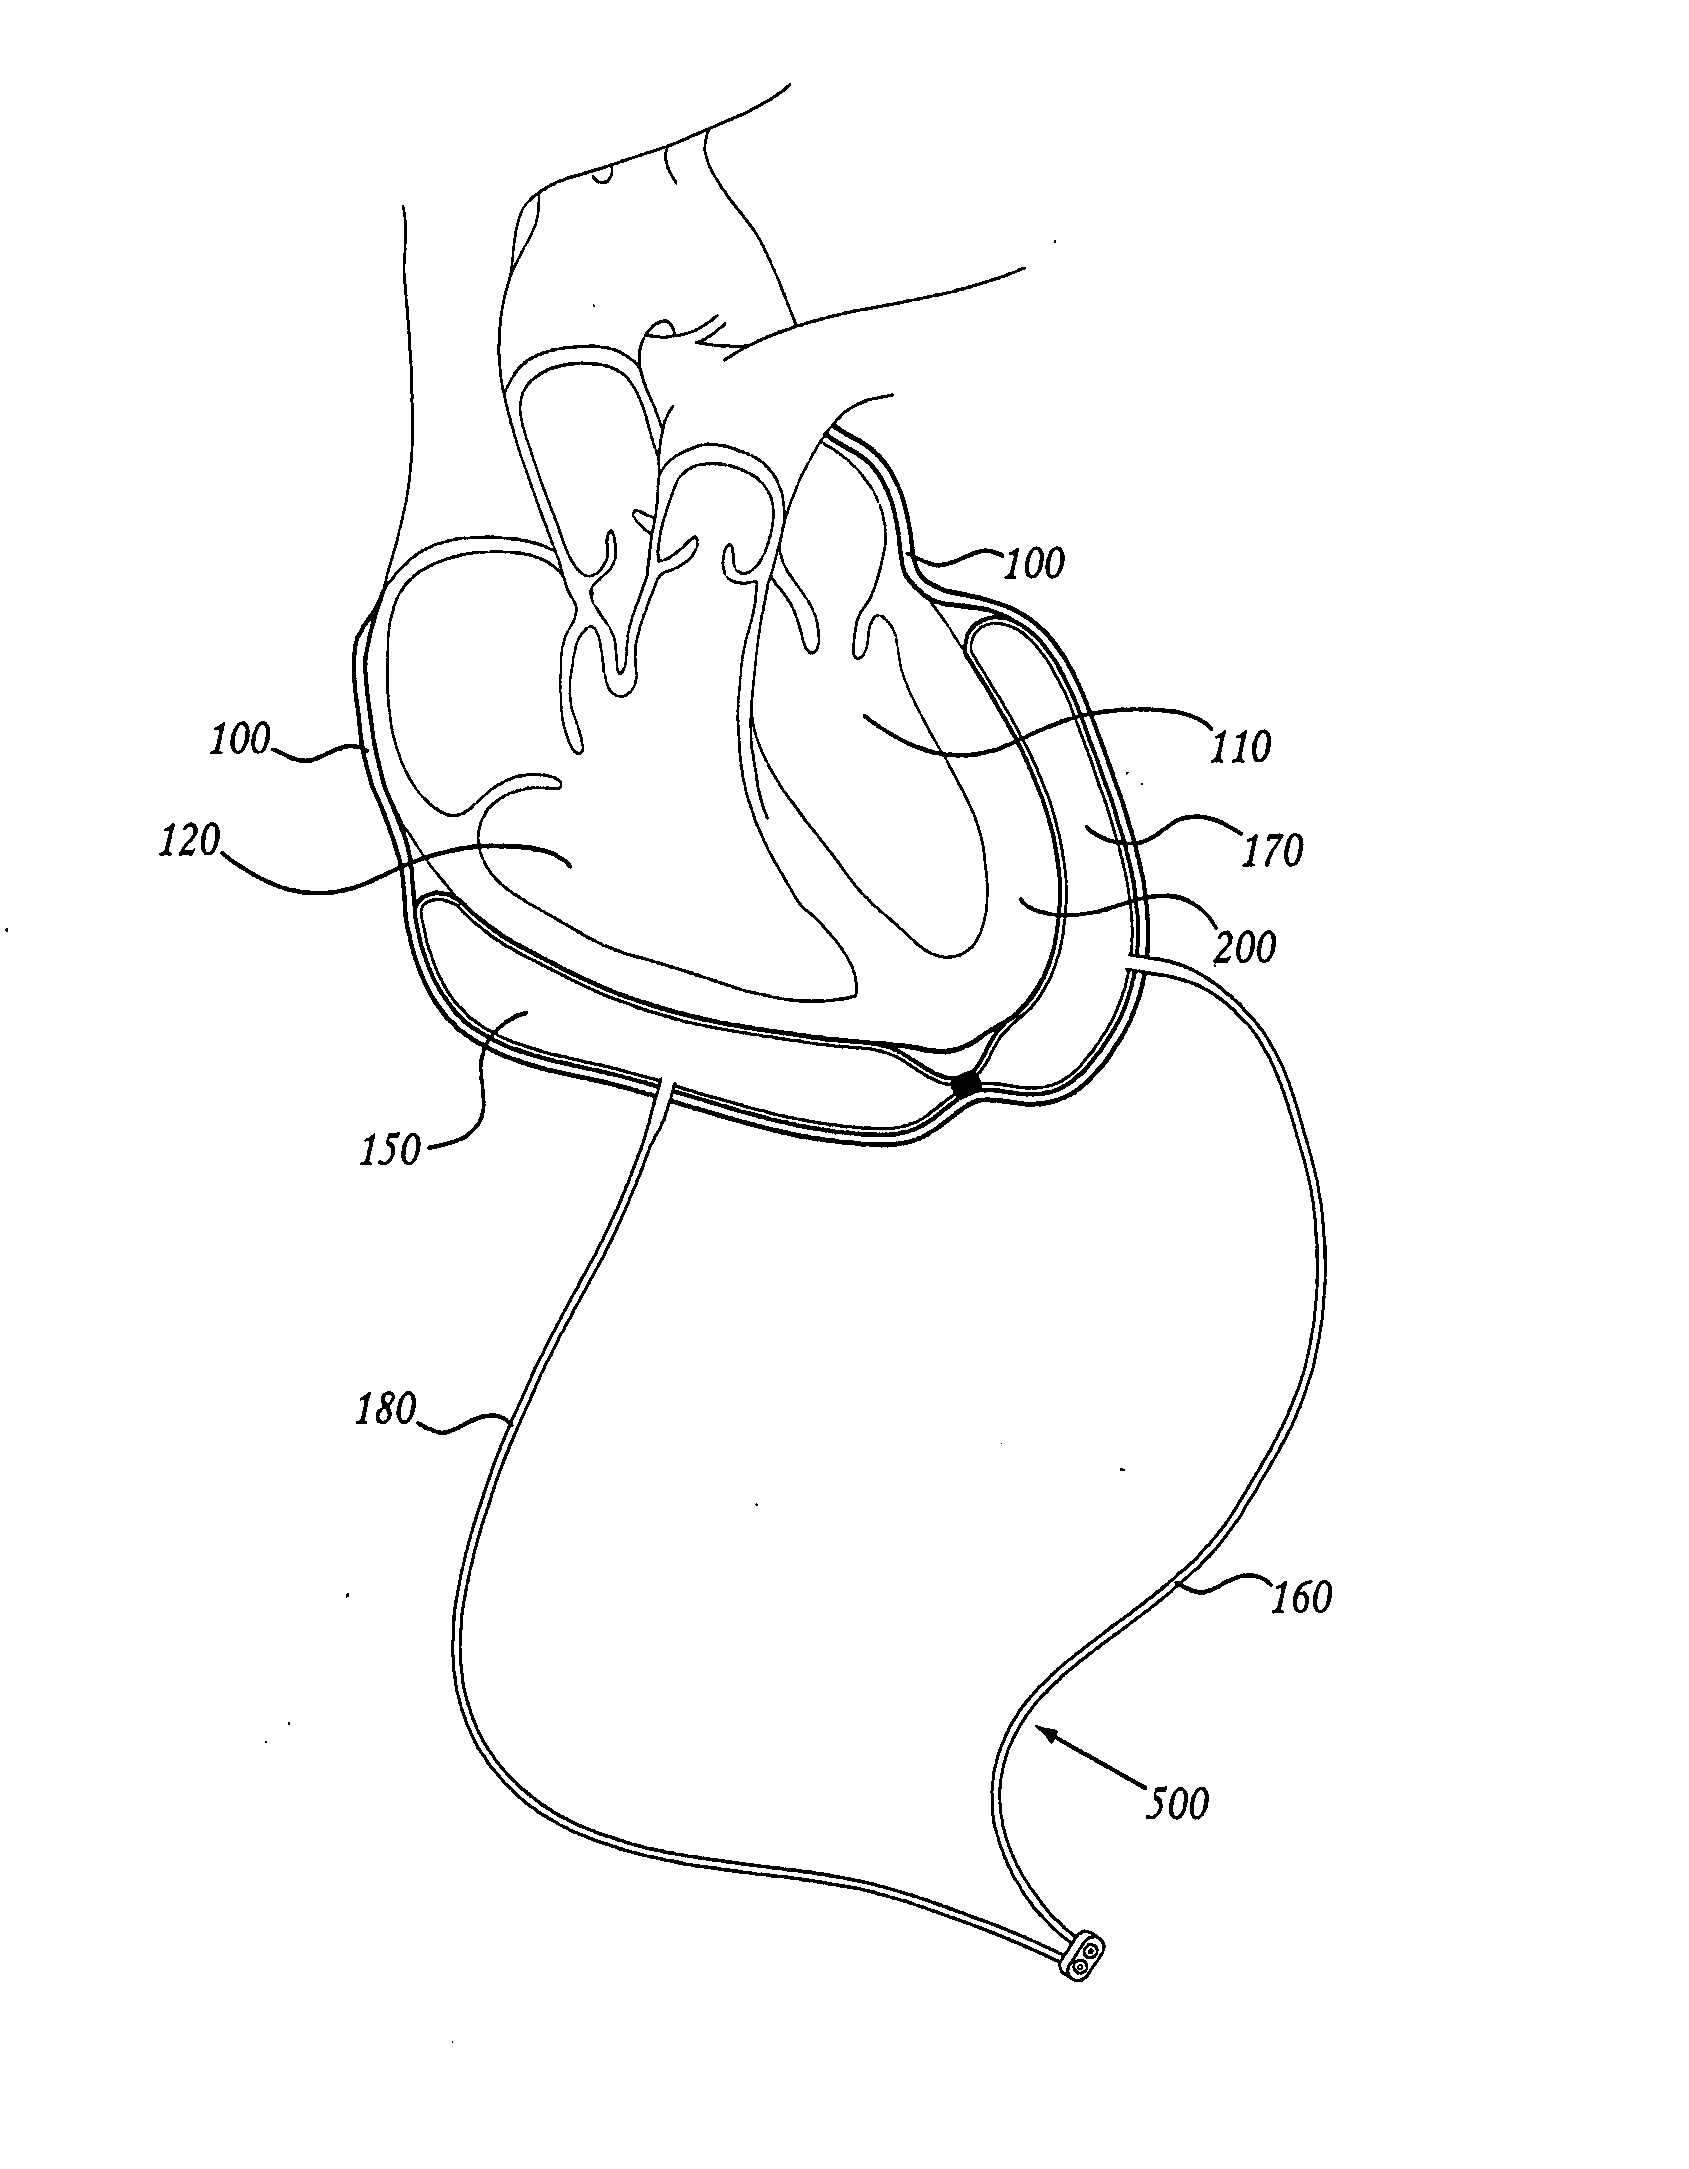 Pericardial inserts